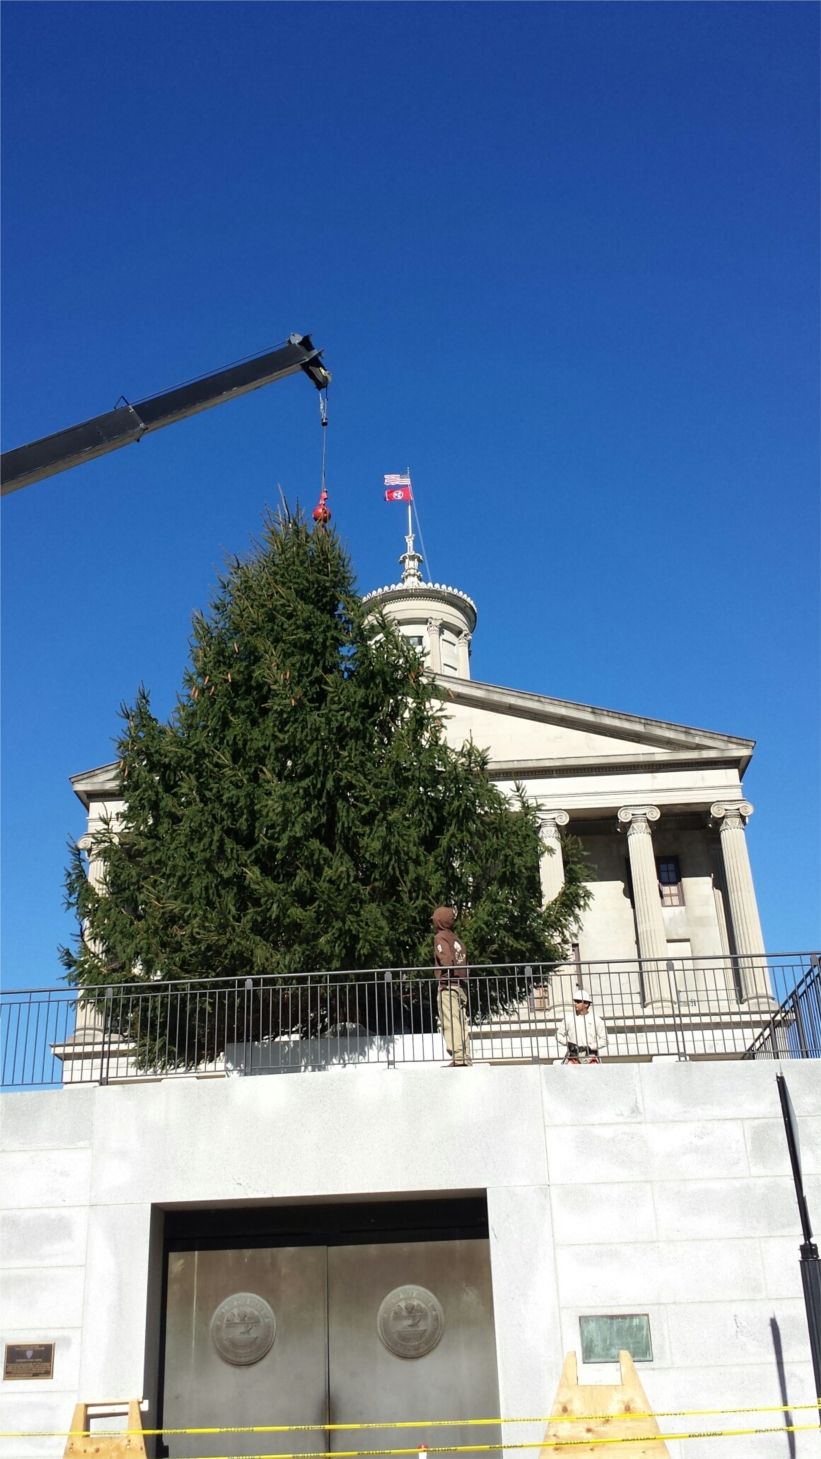 2015 TENNESSEE STATE CHRISTMAS TREE